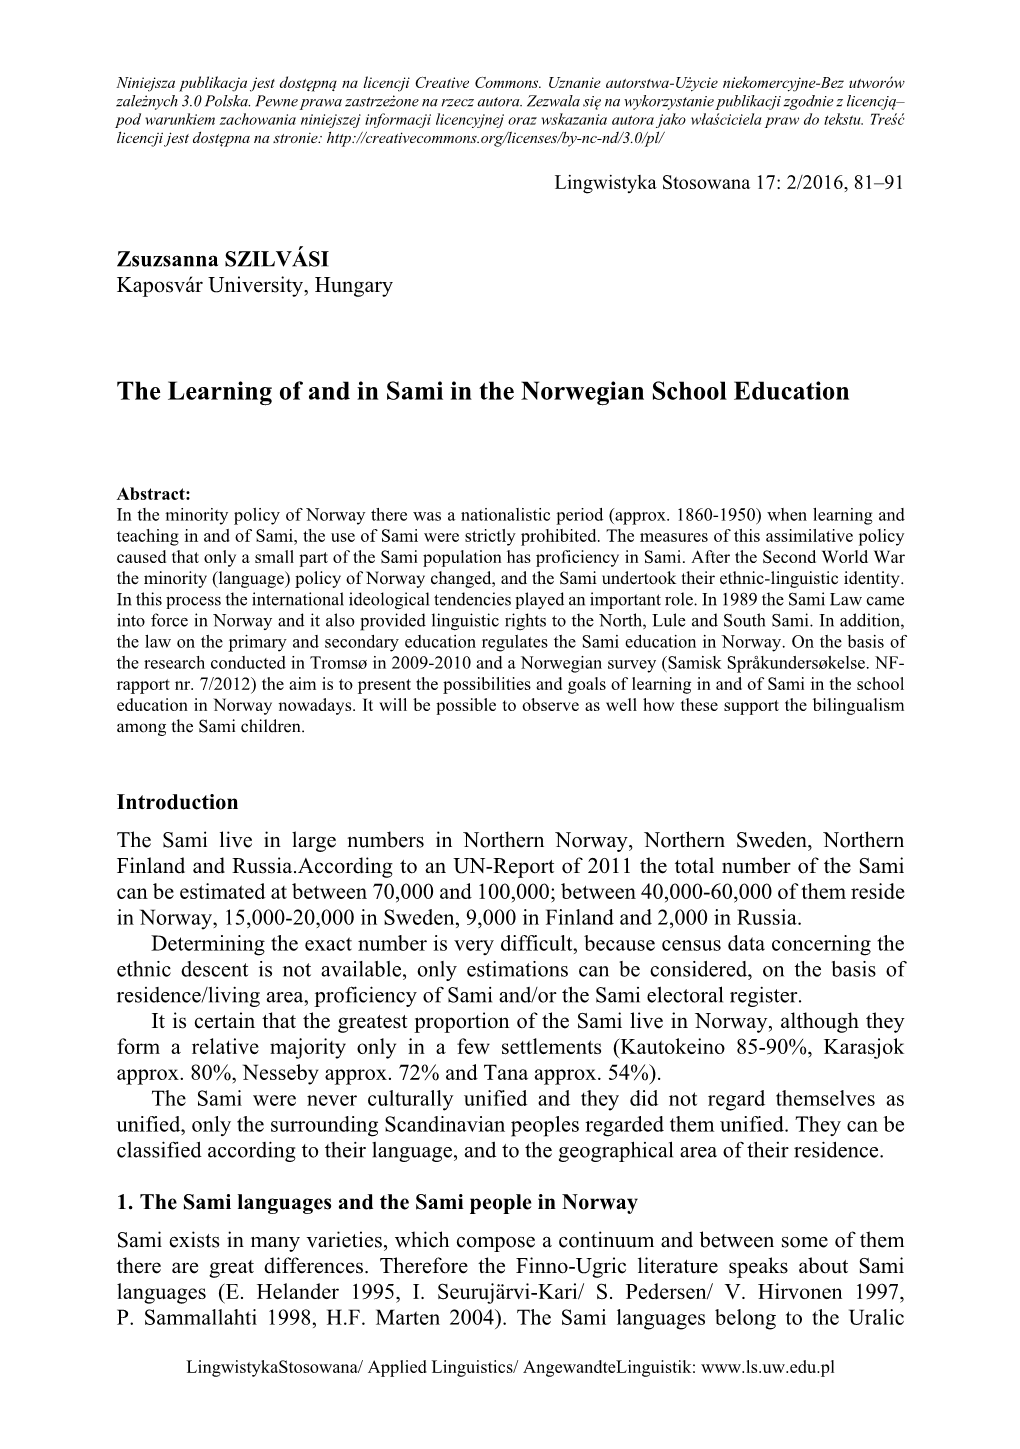 The Learning of and in Sami in the Norwegian School Education